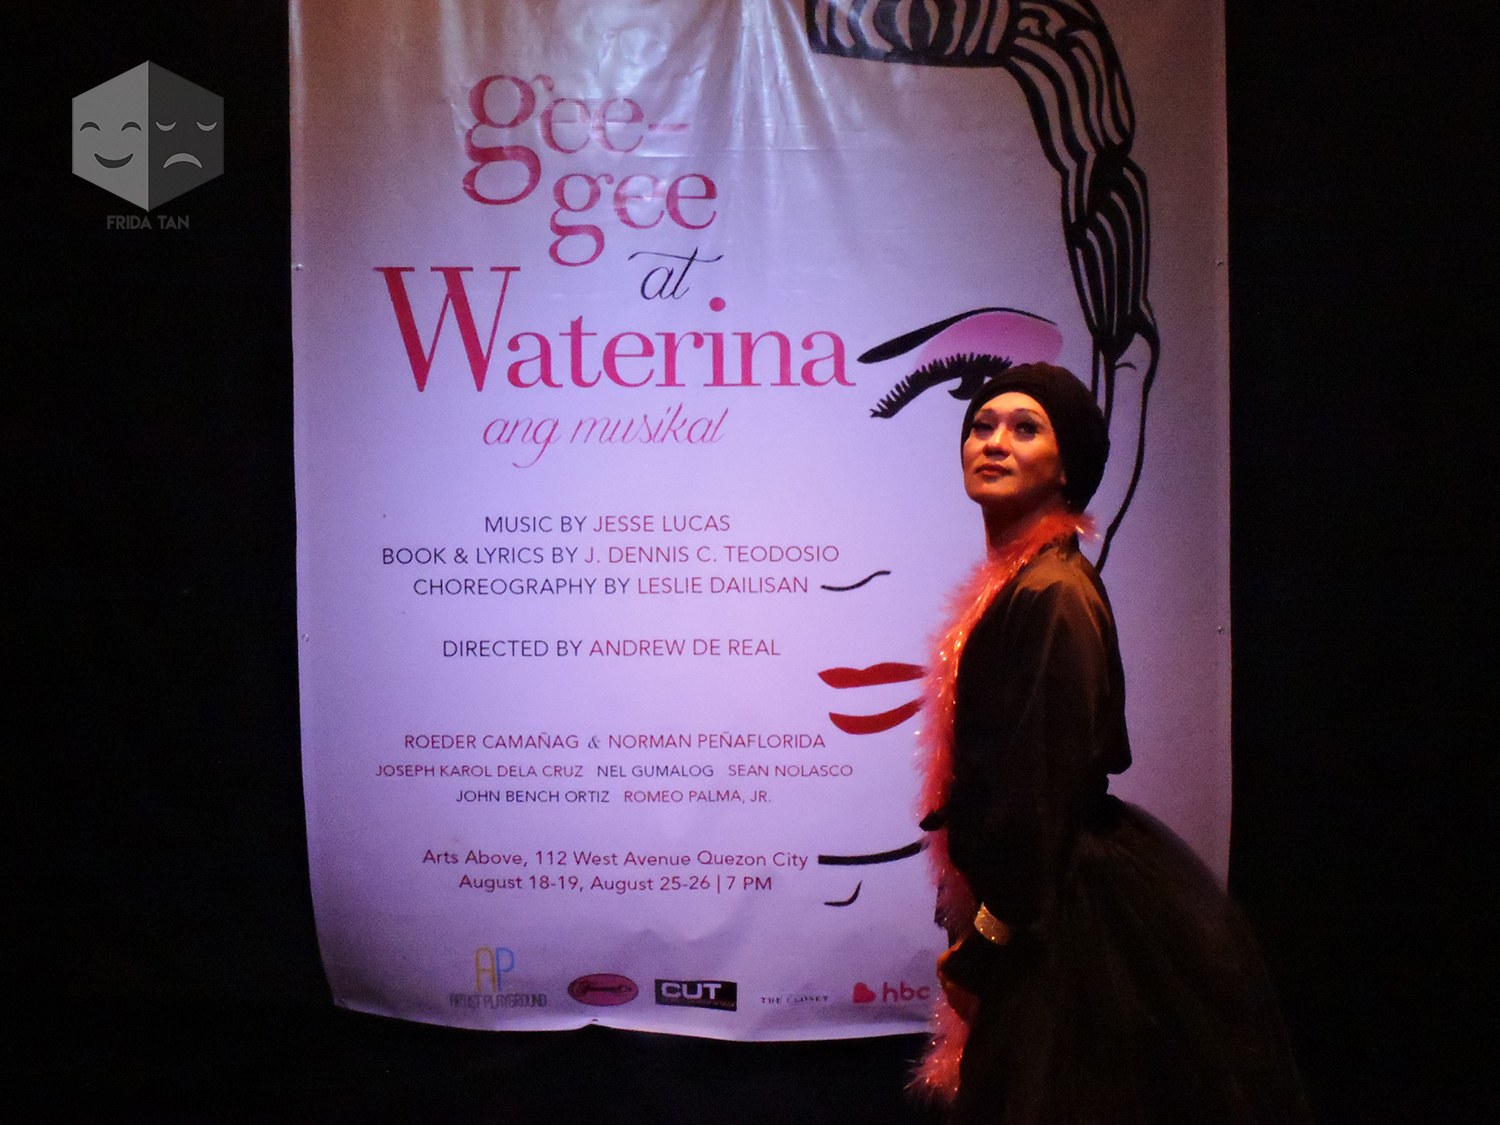 First Look “gee Gee At Waterina” An Original Musical By Artist Playground